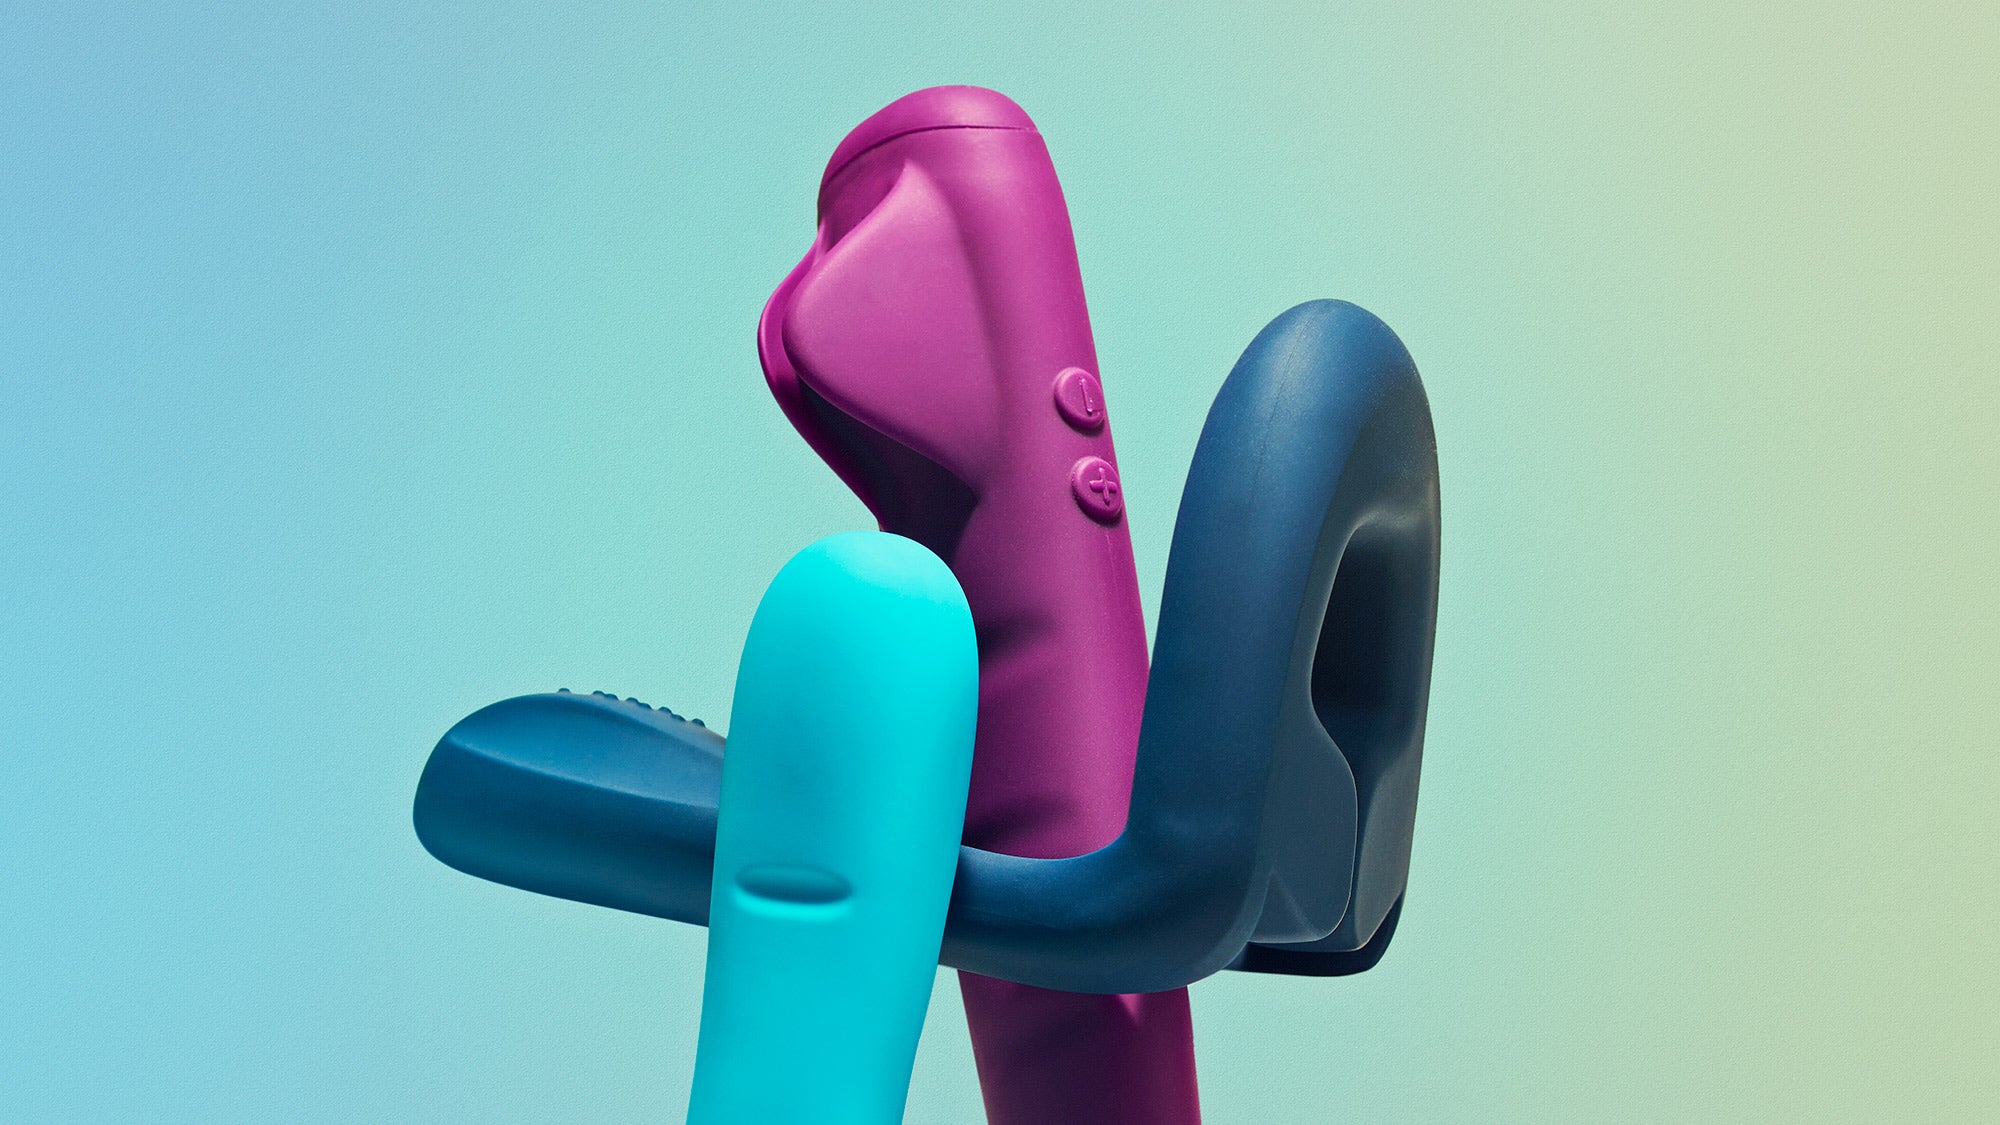 Sex toys engineered to be medical devices Popular Science picture